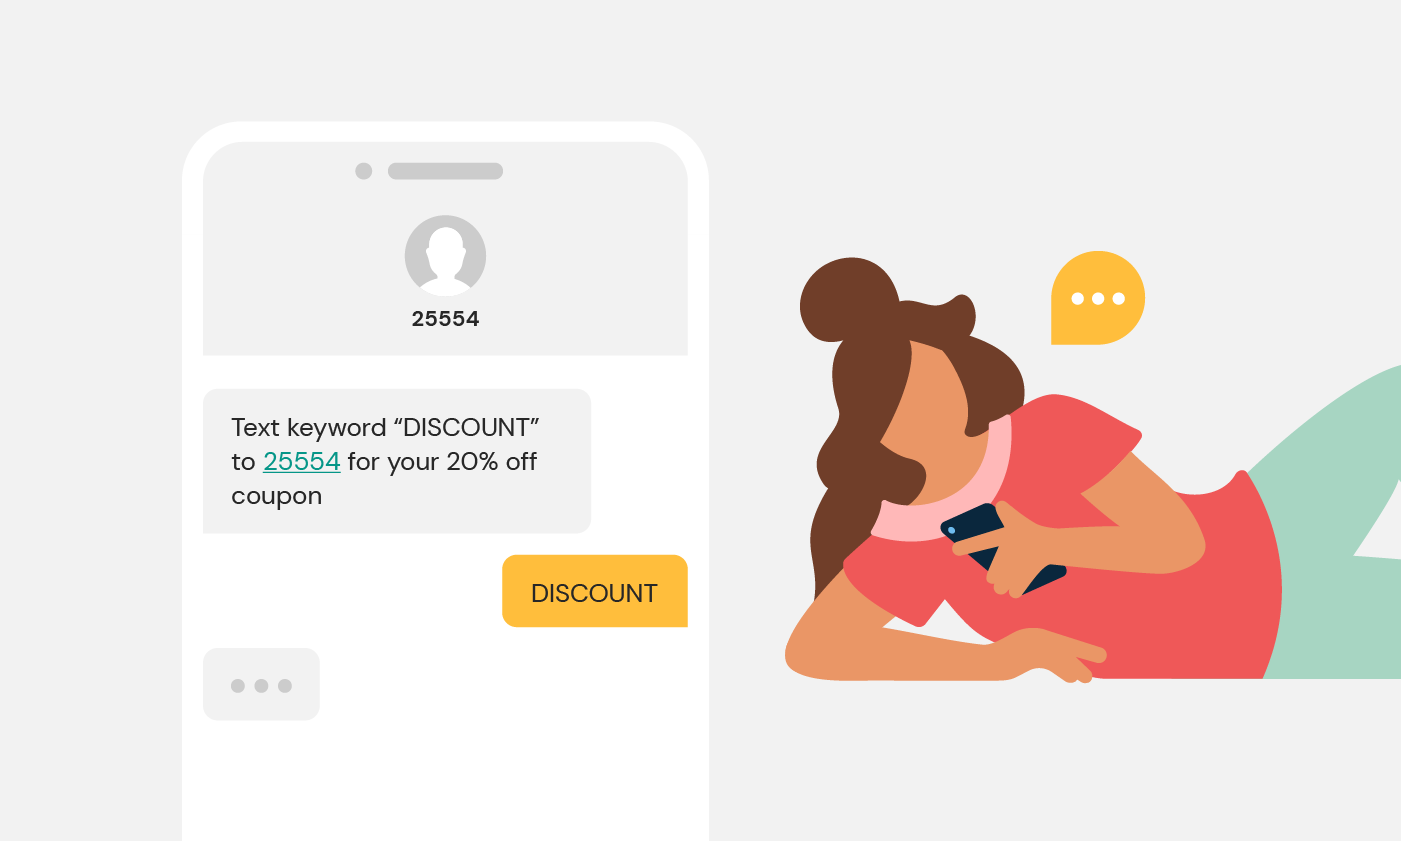 Illustration shows a person opting in to receiving messages via short code